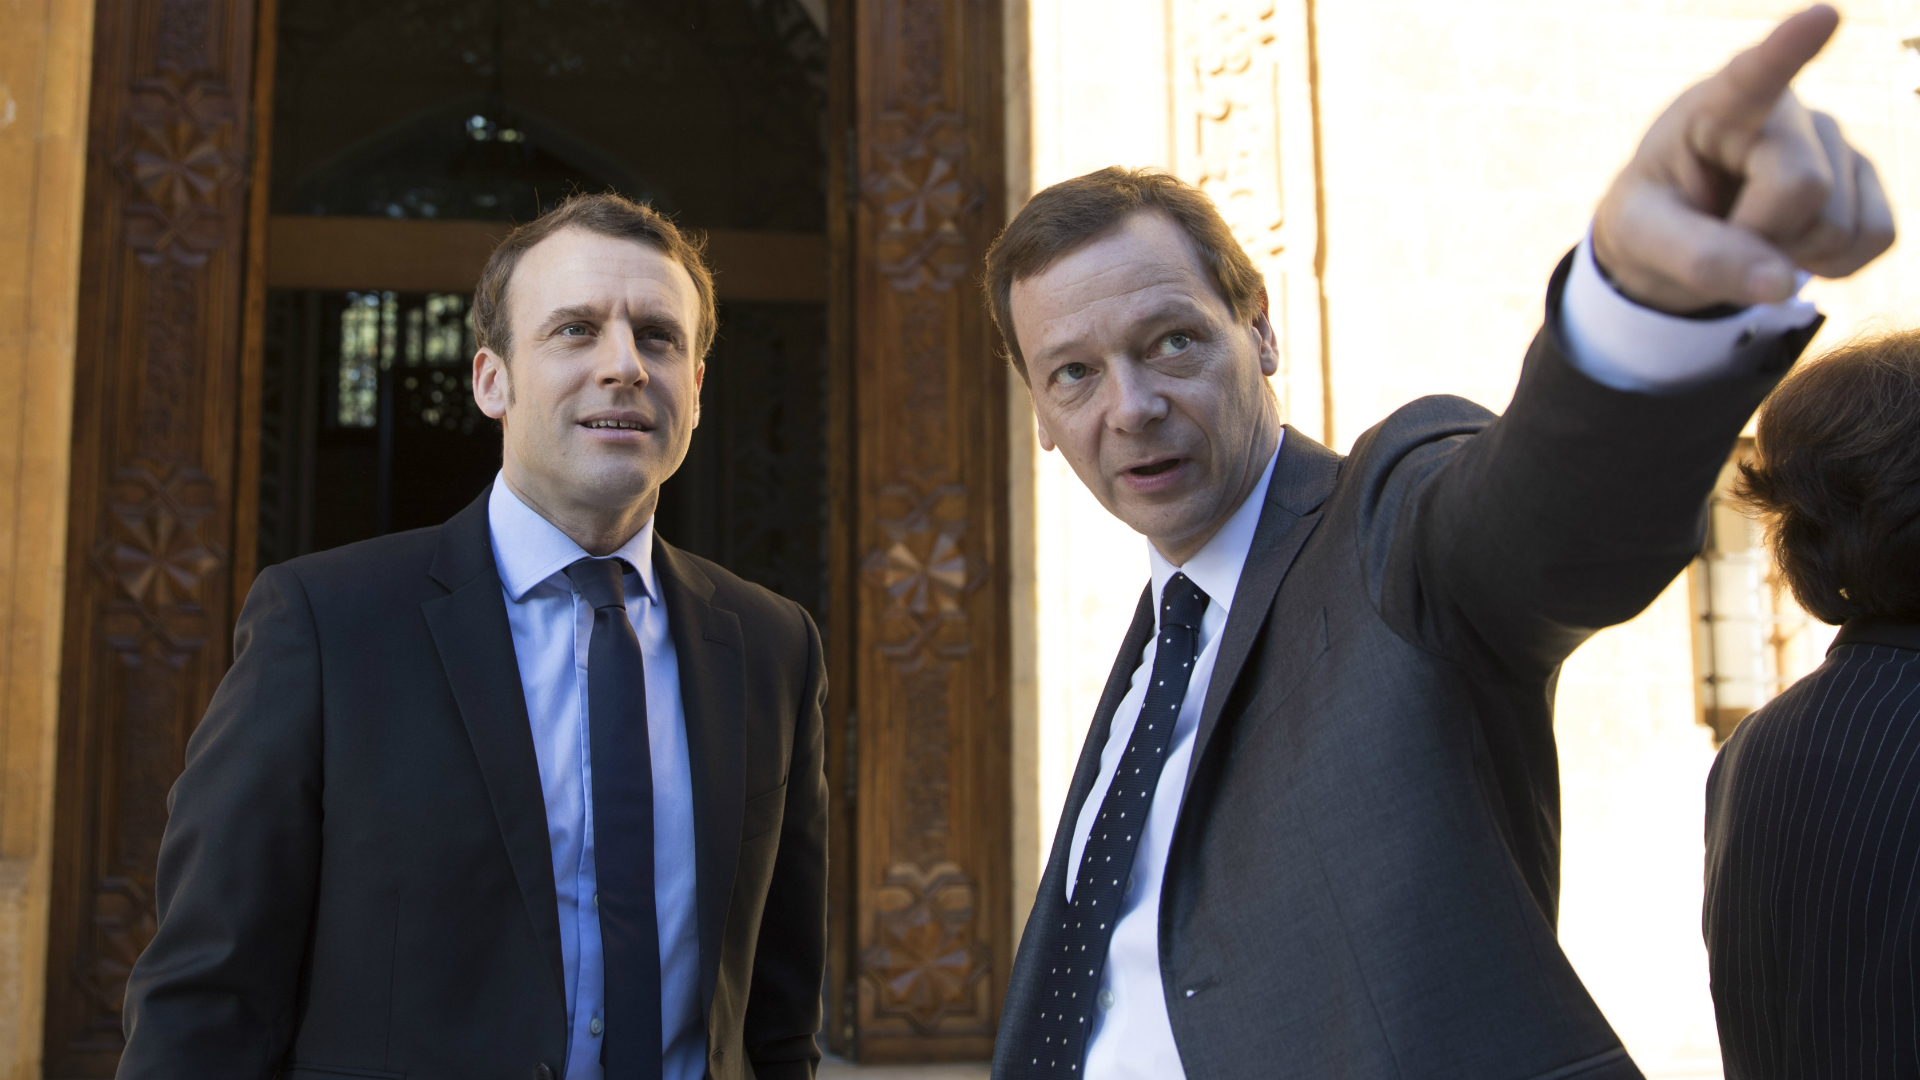 Macron advisor heads to Iran to calm nuclear tensions